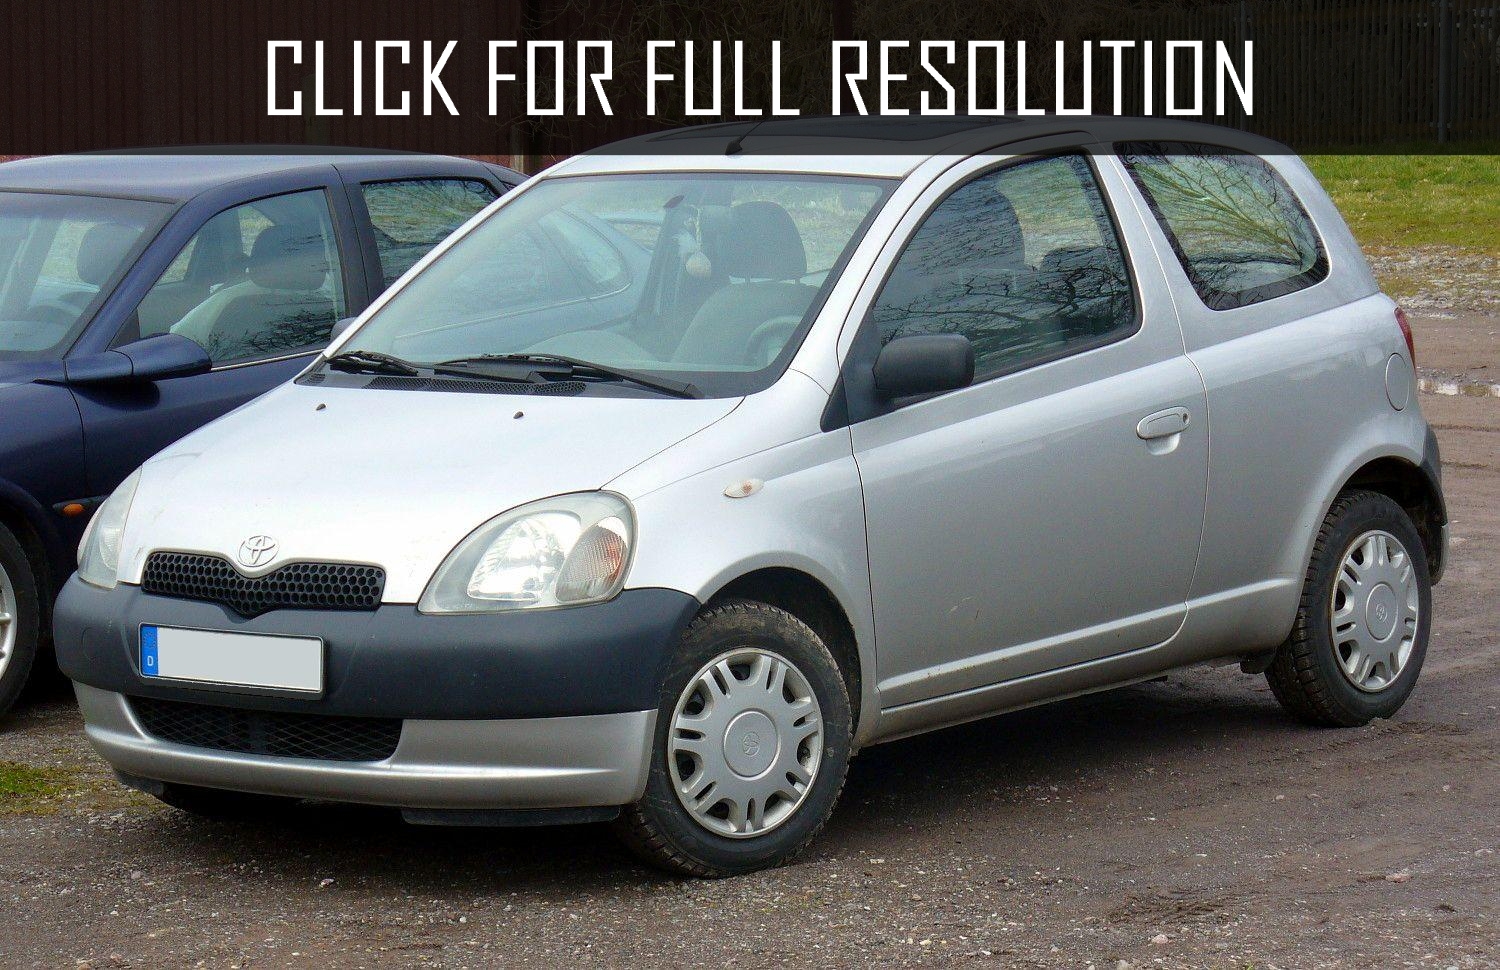 1998 Toyota Yaris best image #15/27 - share download